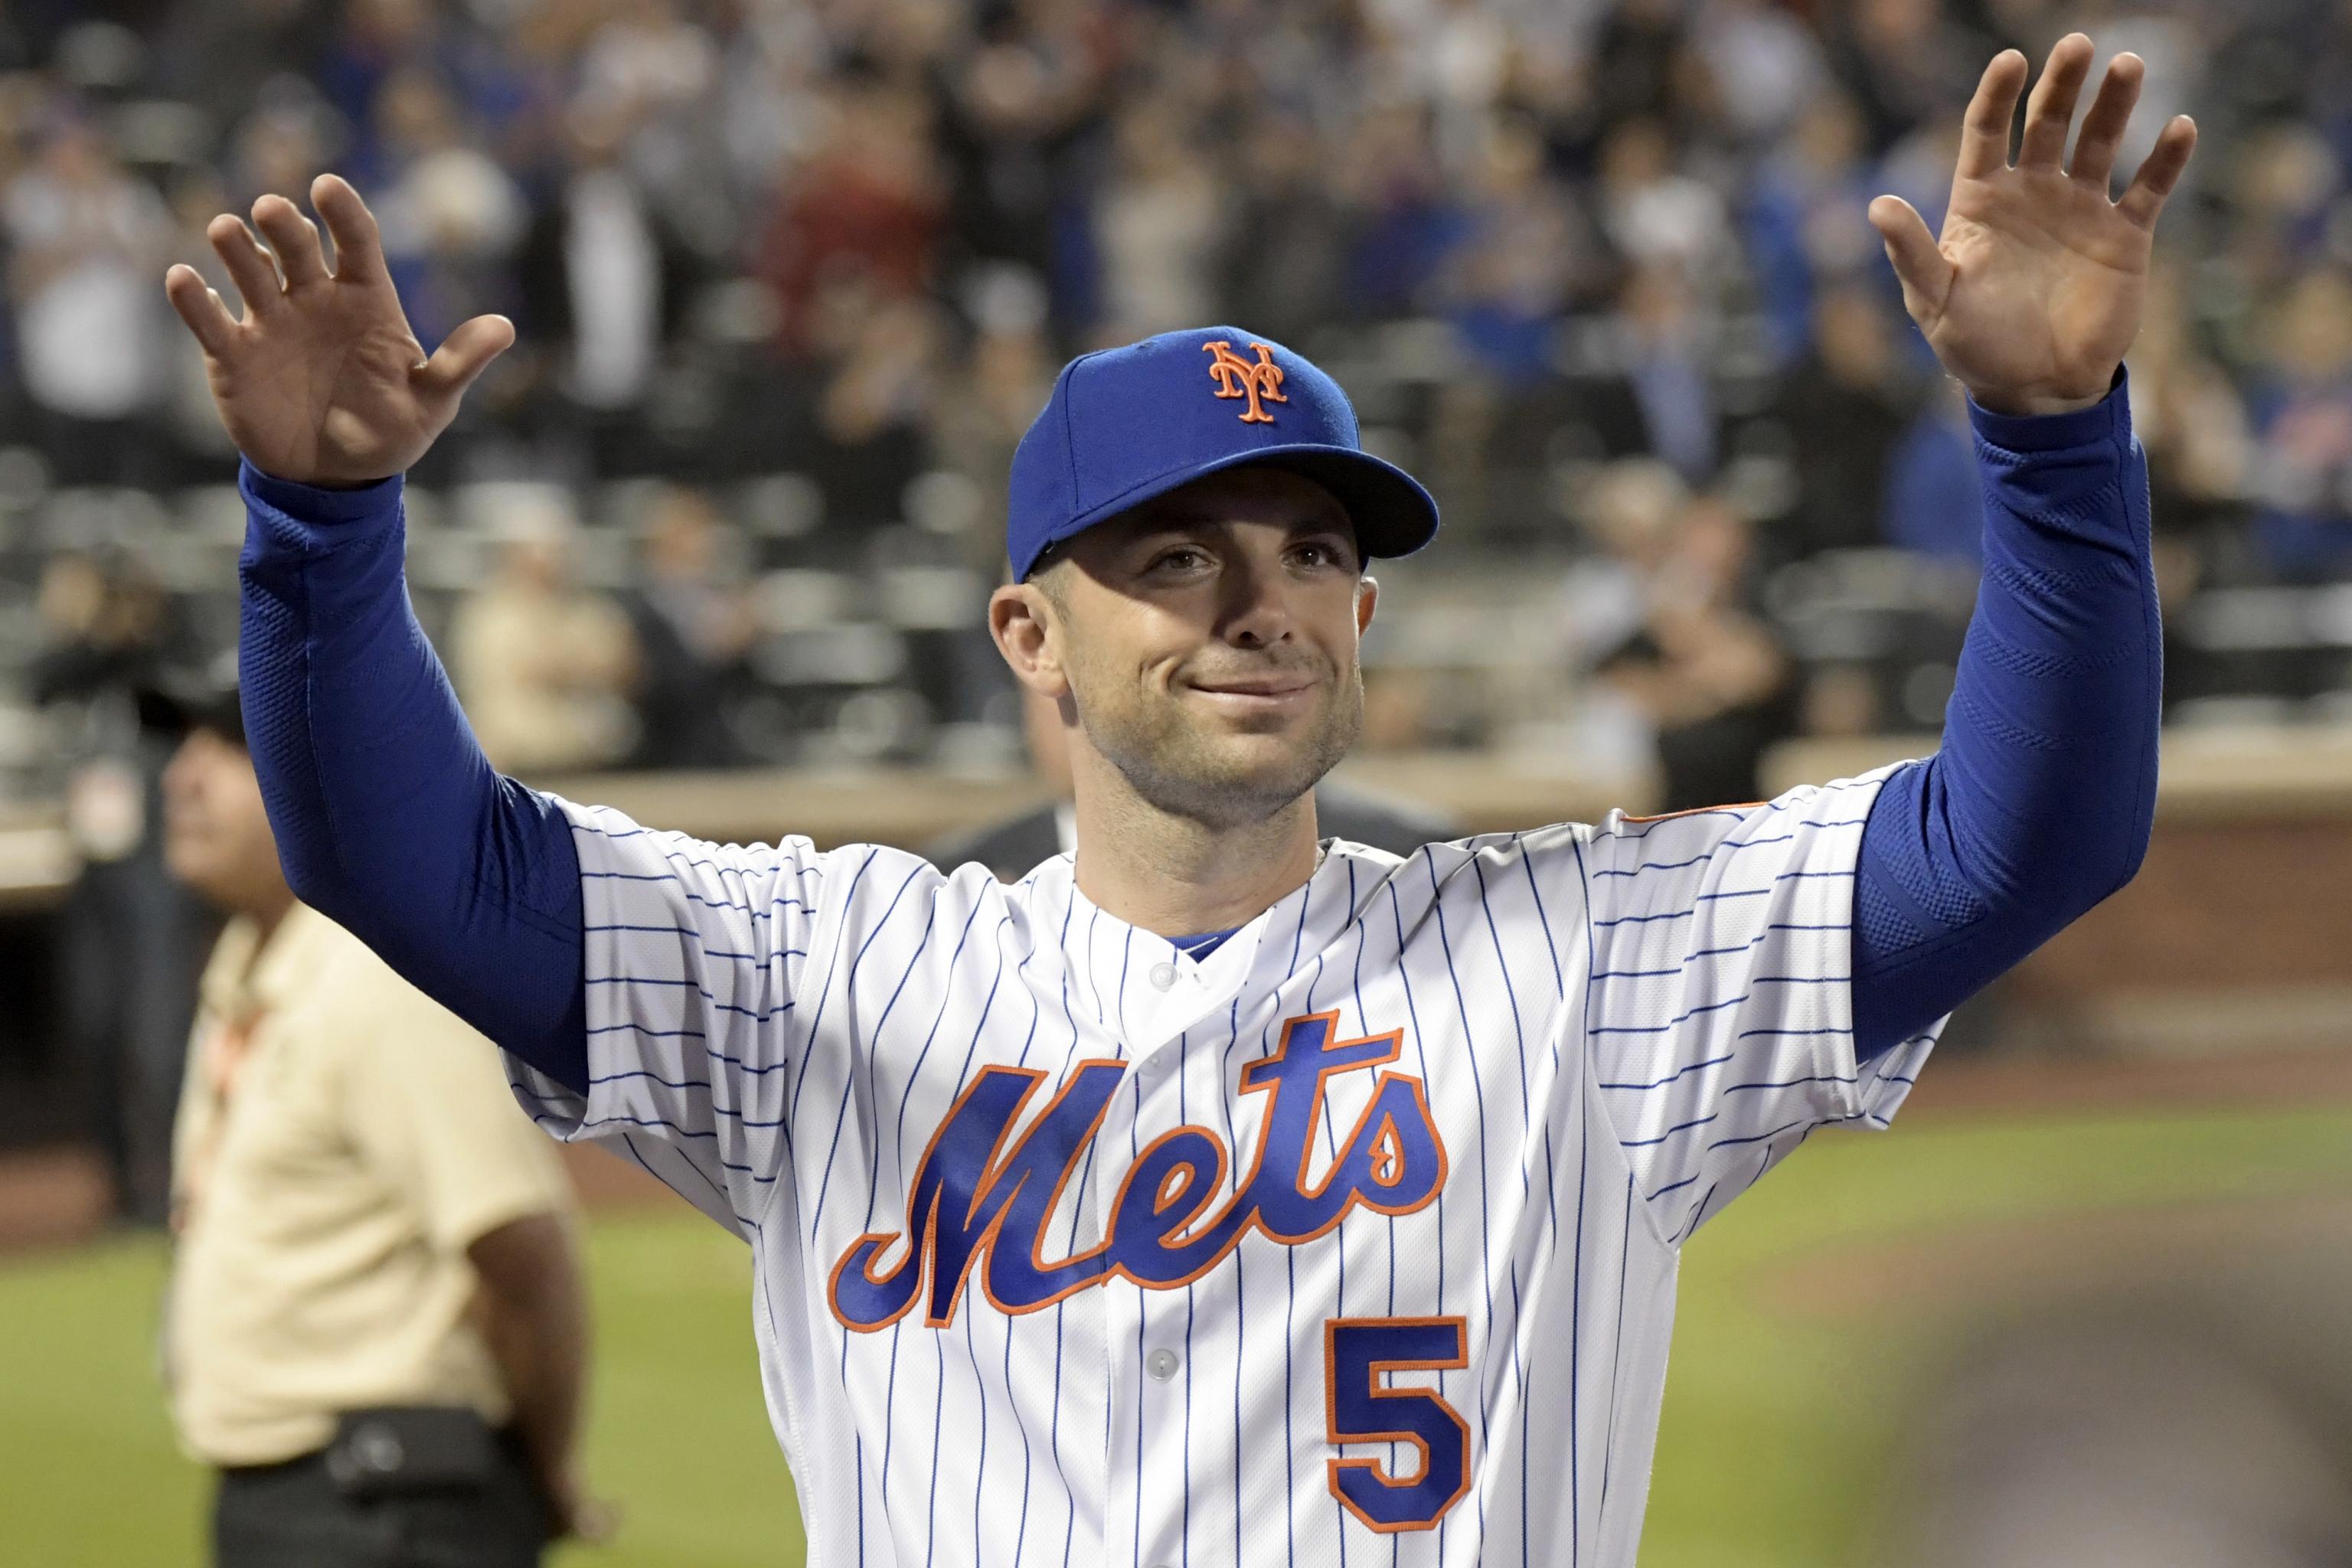 Why David Wright sees the Mets' transition as an opportunity